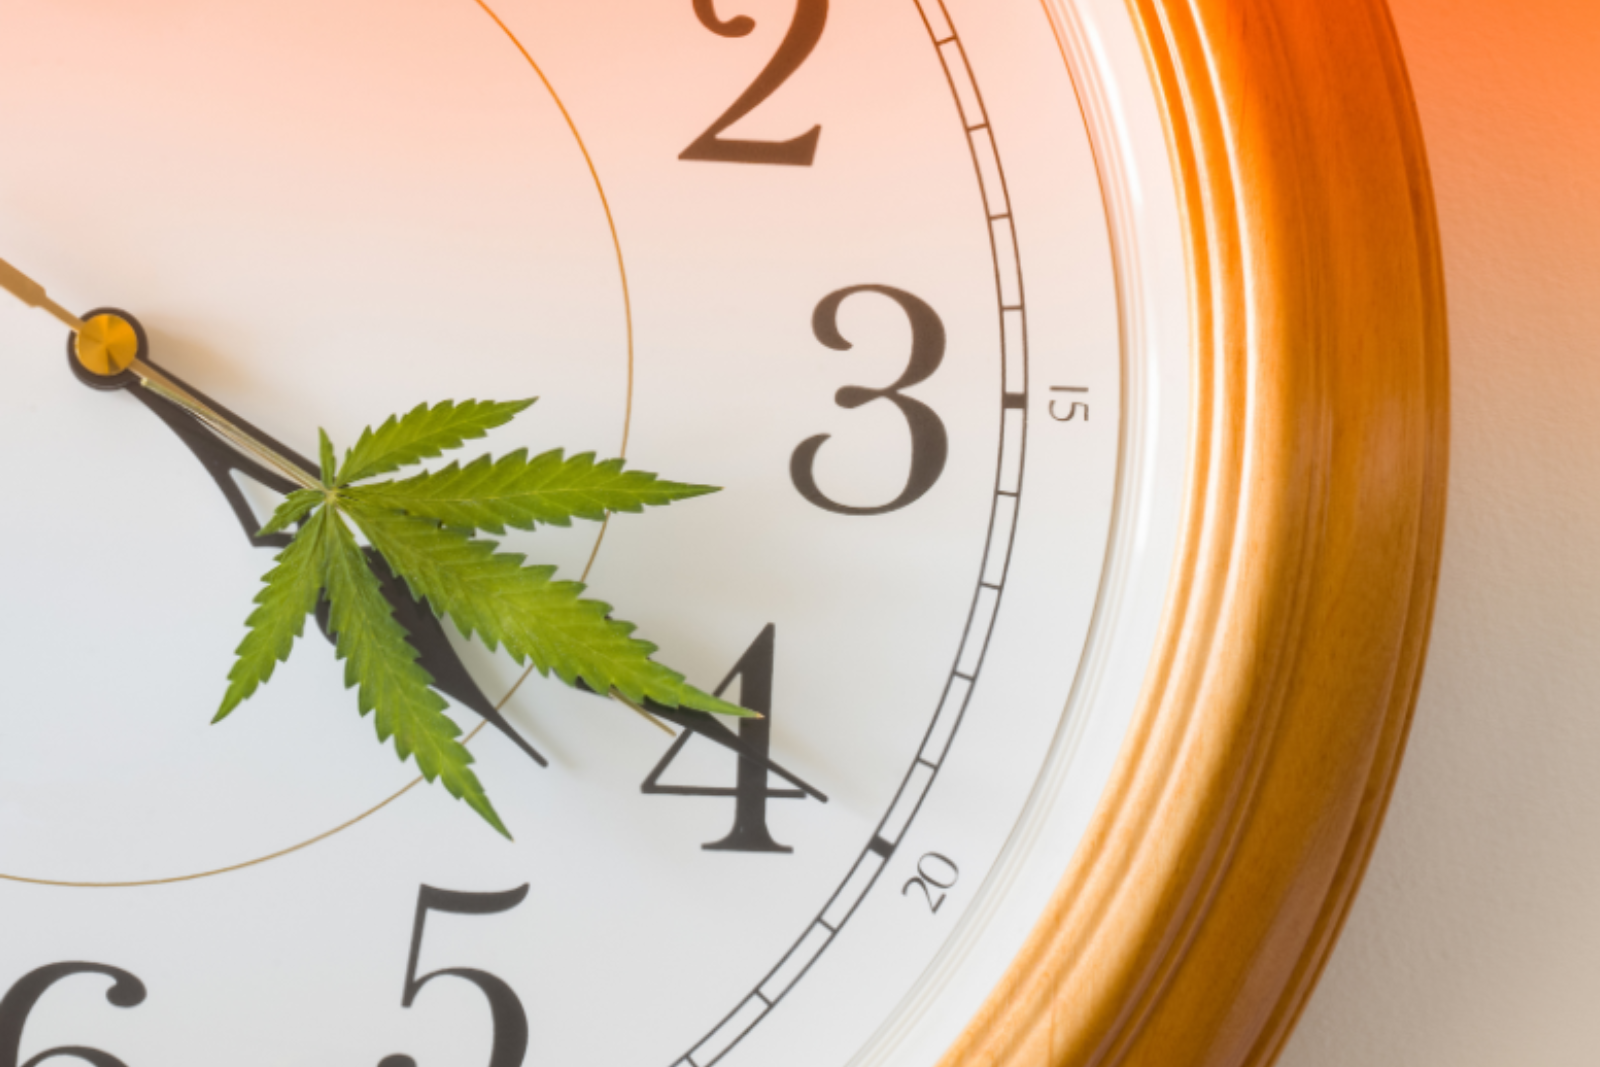 A clock showing the time “4:20” with a cannabis leaf on the hour hand